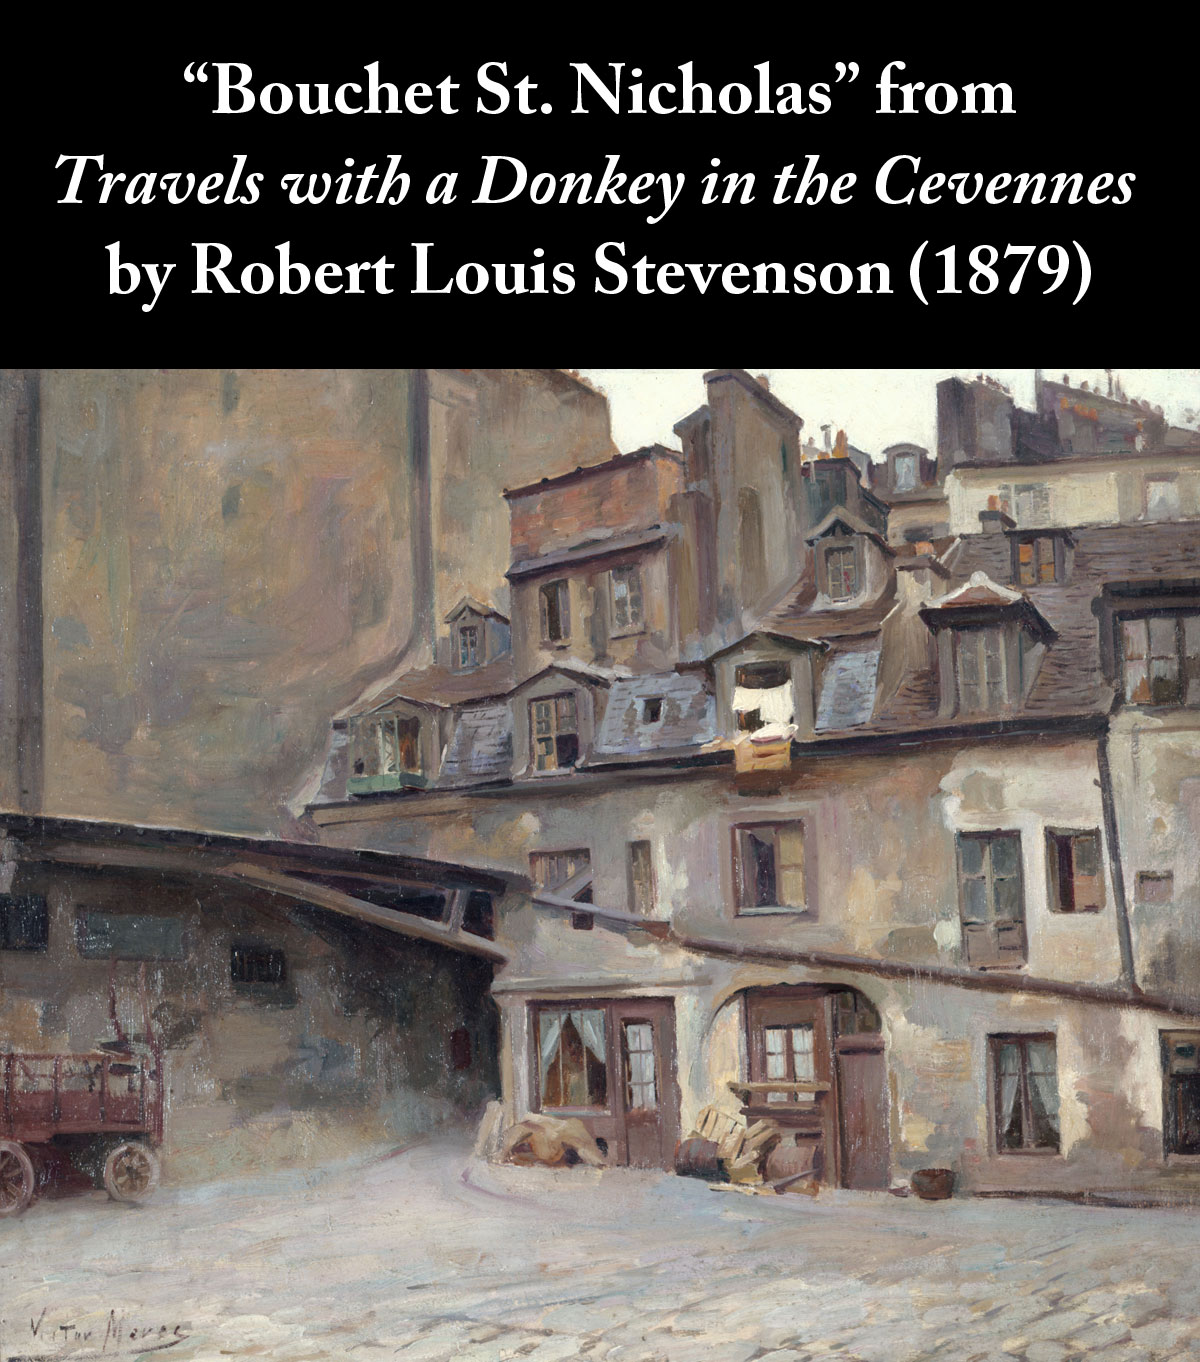 Bouchet St. Nicholas from Travels with a Donkey in the Cevennes by Robert Louis Stevenson (1879)